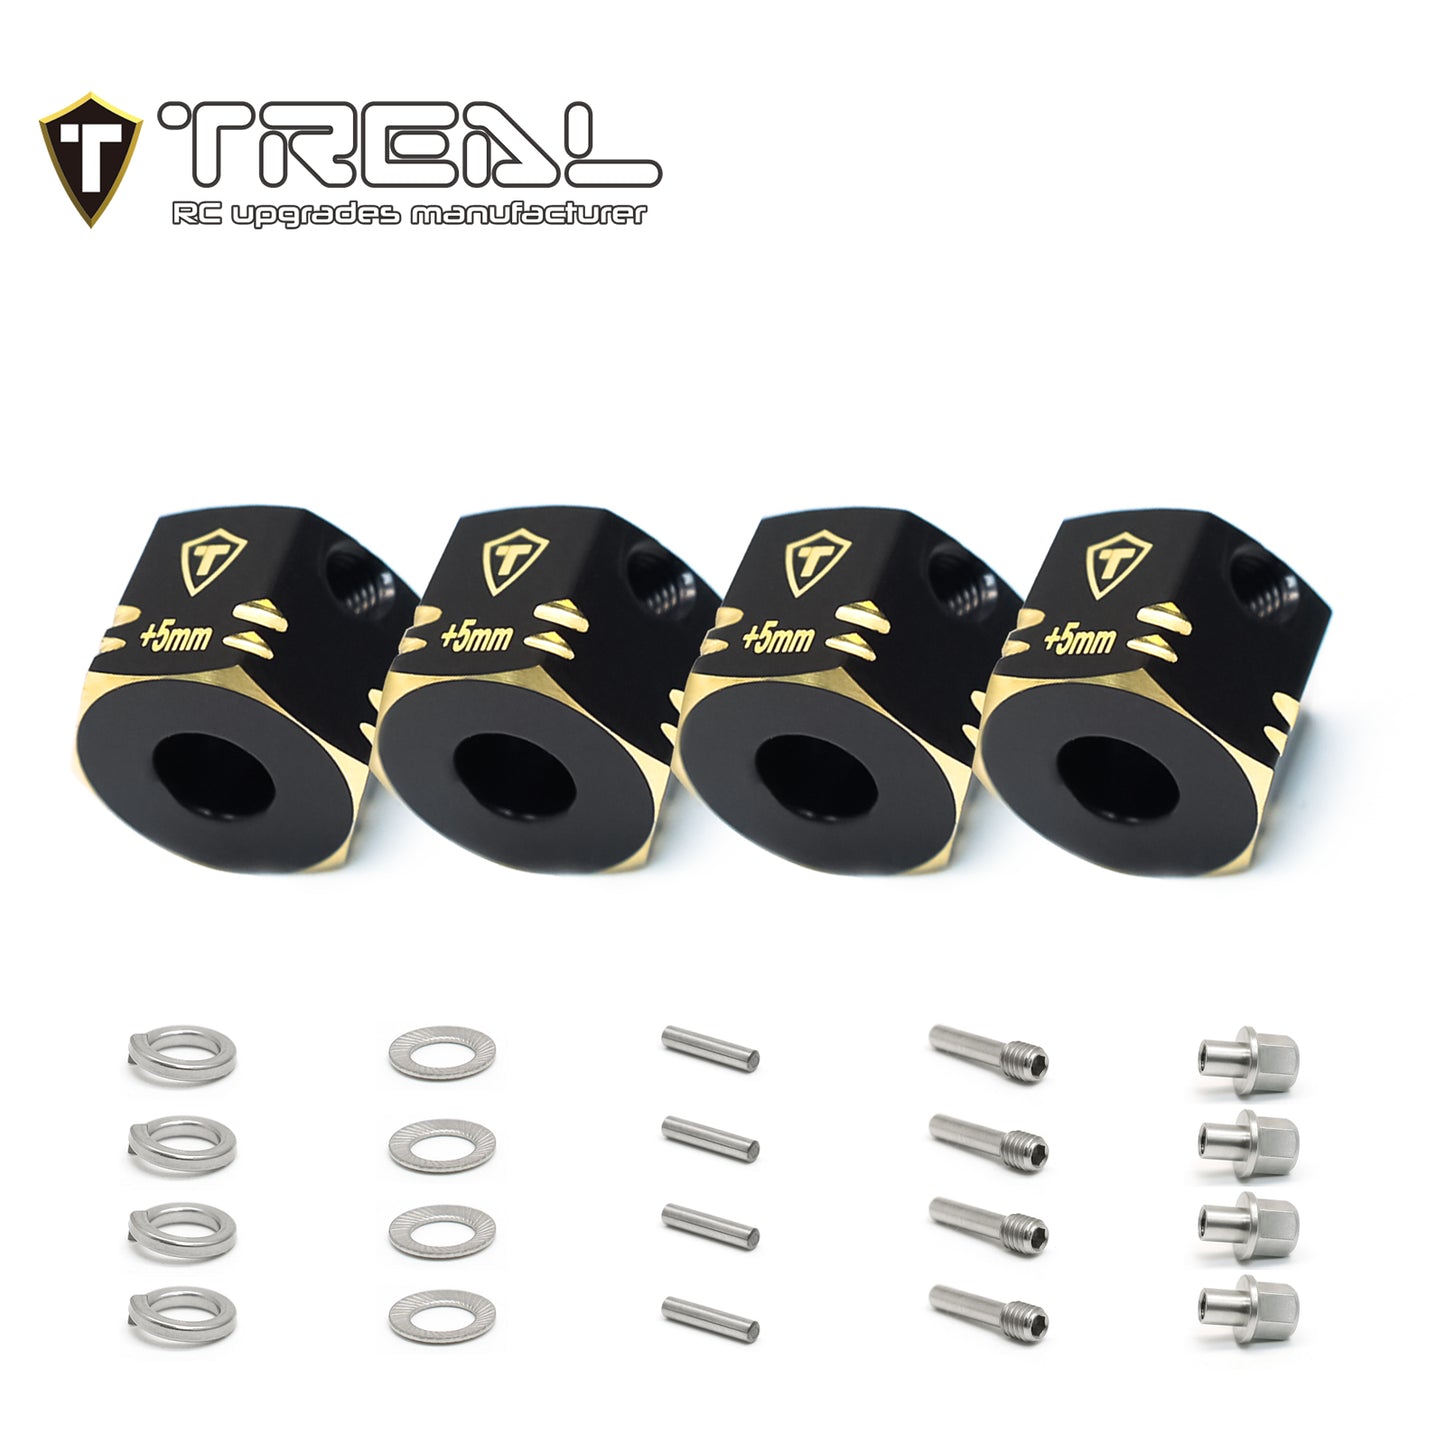 TREAL Brass 12mm Wheel Hex Adapters Extended(4pcs) for 1/10 RC Crawler Axial SCX10 PRO SCX10 III, SCX10 II ,Capra (Height:10mm)